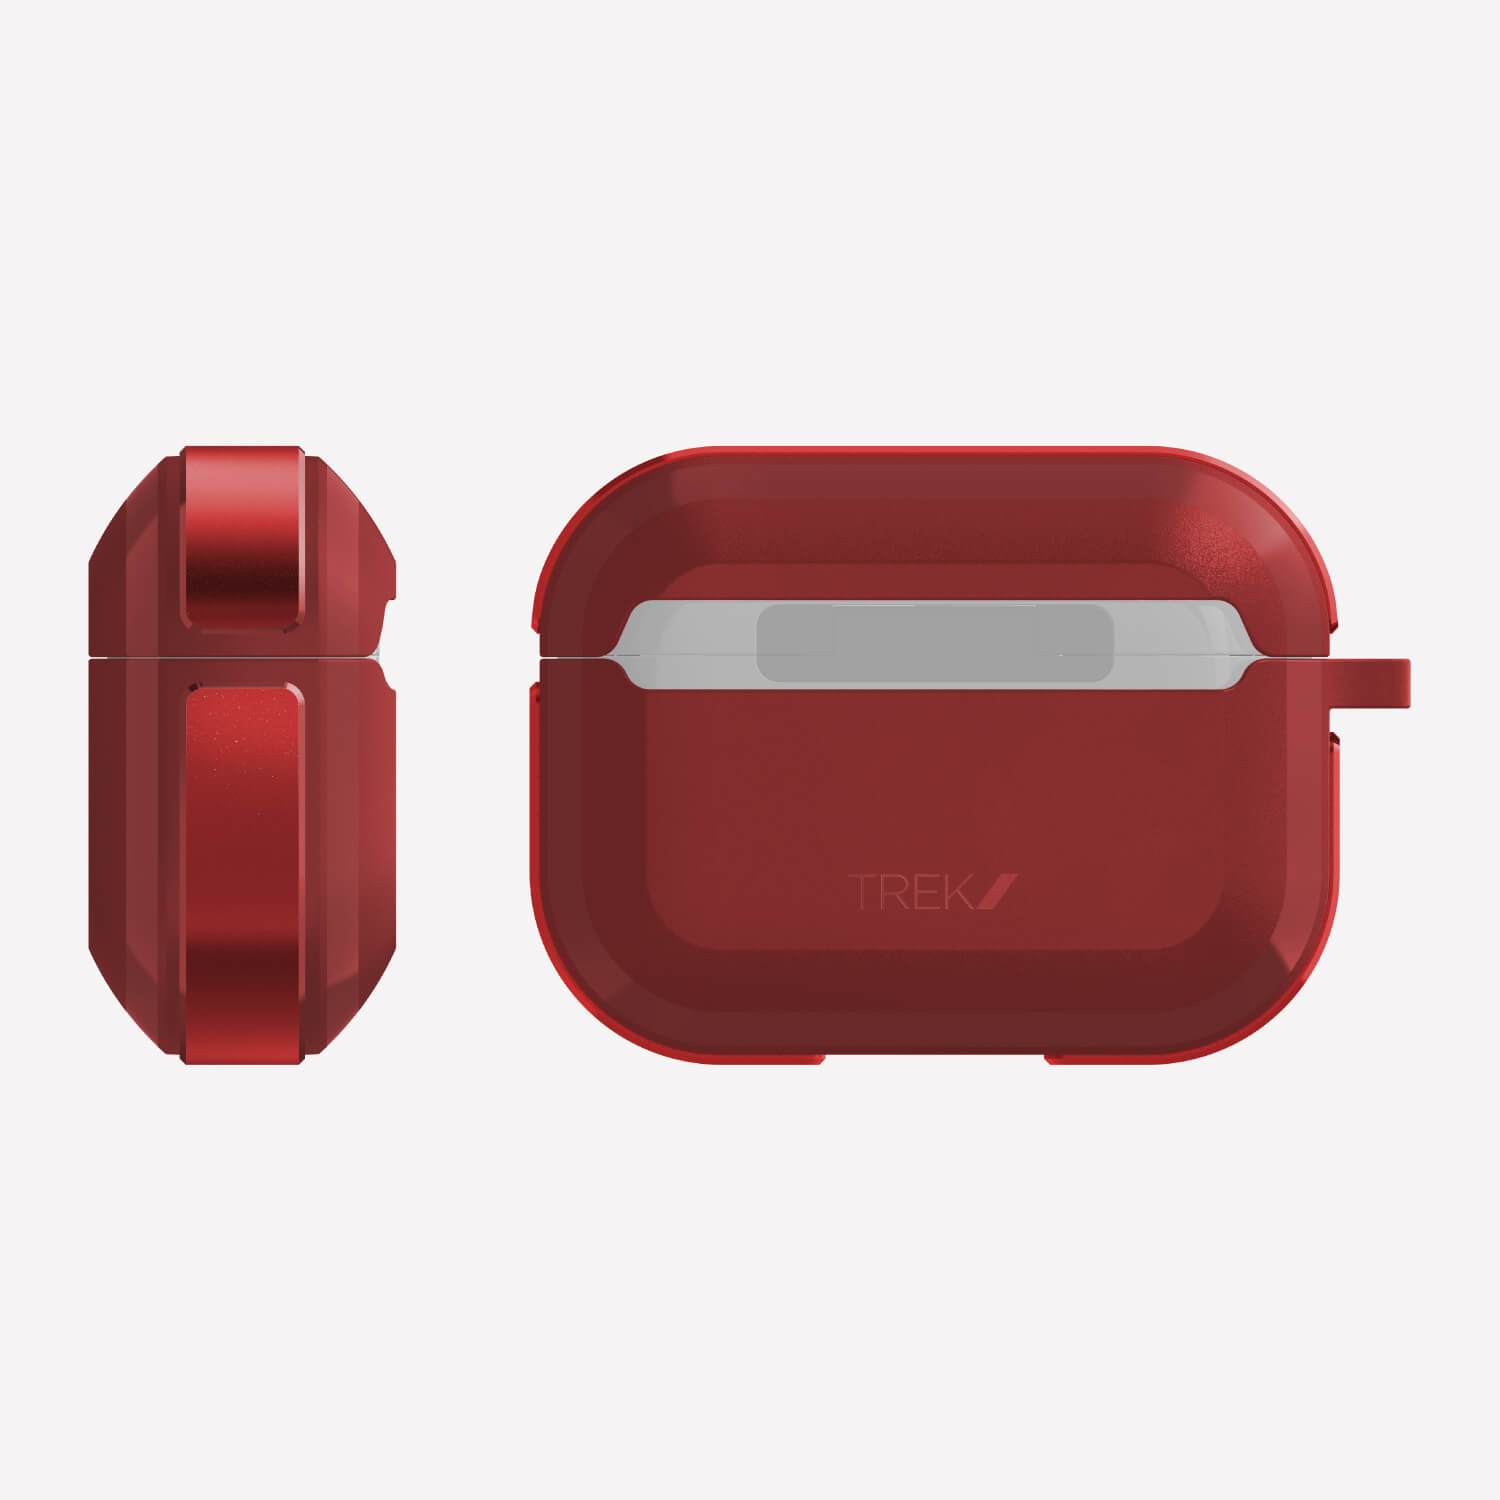 A red Raptic TREK case for the Apple AirPods Pro, featuring wireless charging capability.